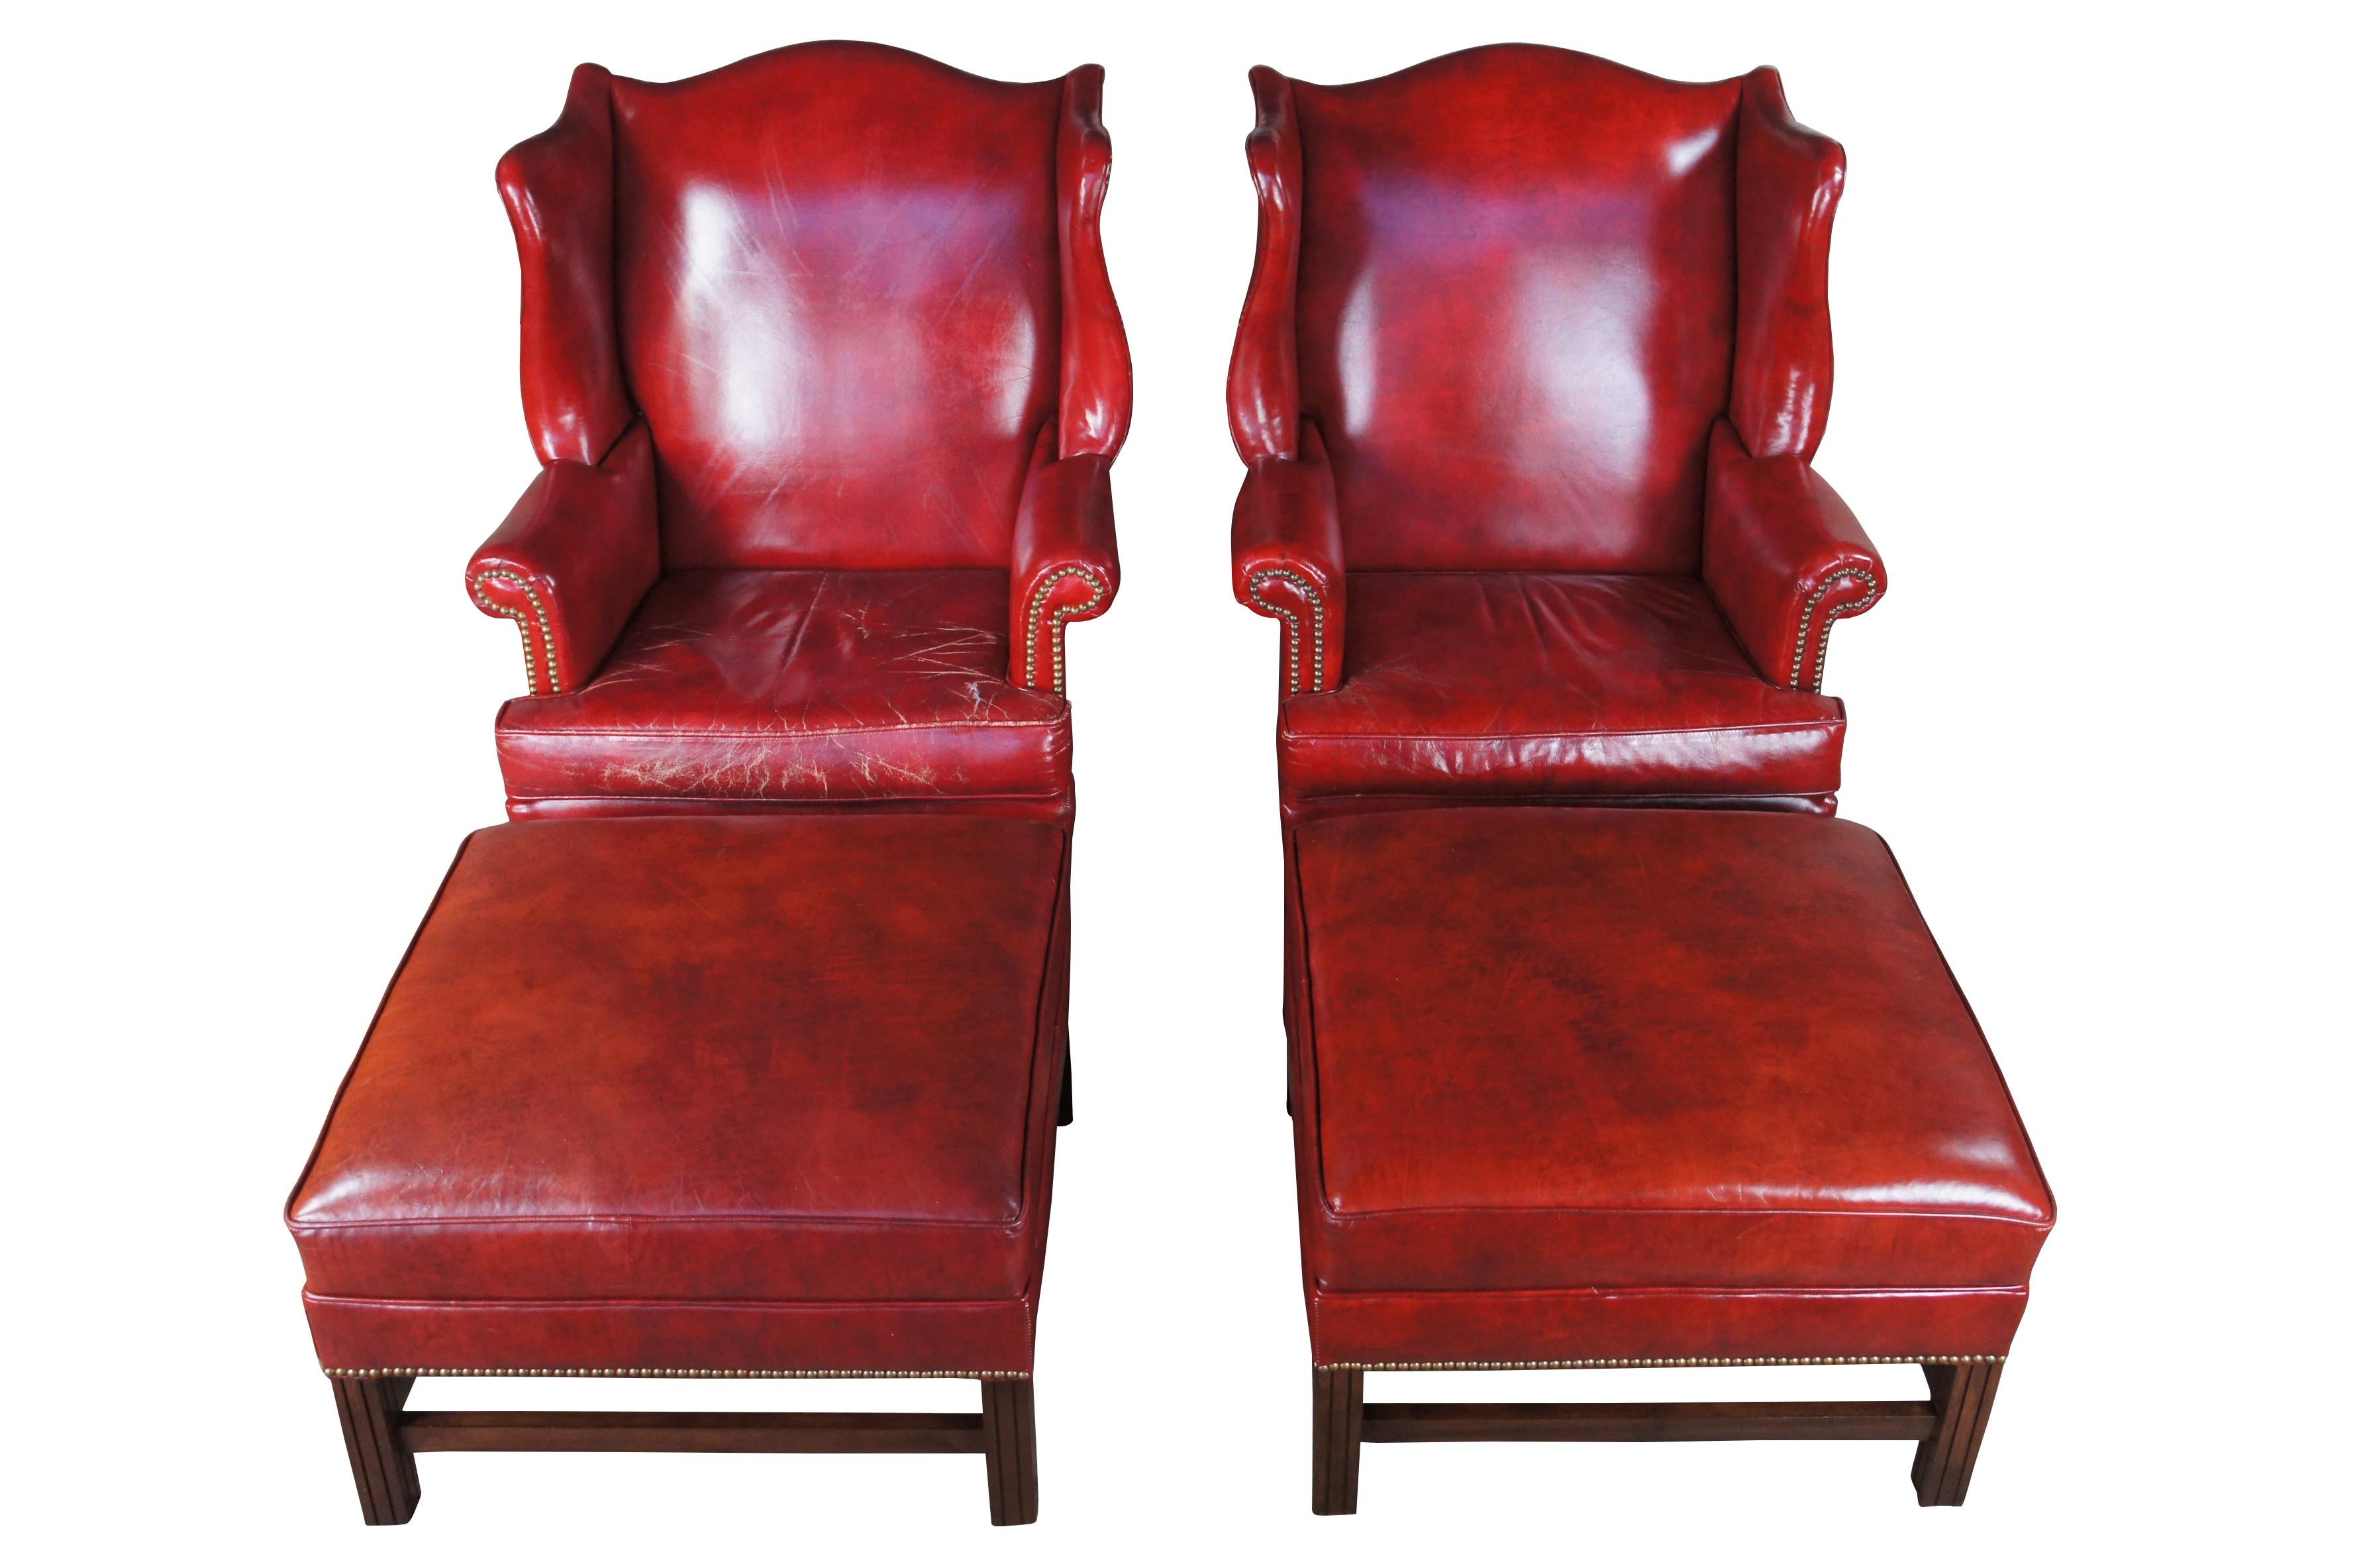 Mid century Hickory Chair Company wingback armchairs and ottomans.  Made of red leather featuring Chippendale styling with serpentine form, nailhead trim, rolled arms and fluted mahogany legs.

Dimensions:
33